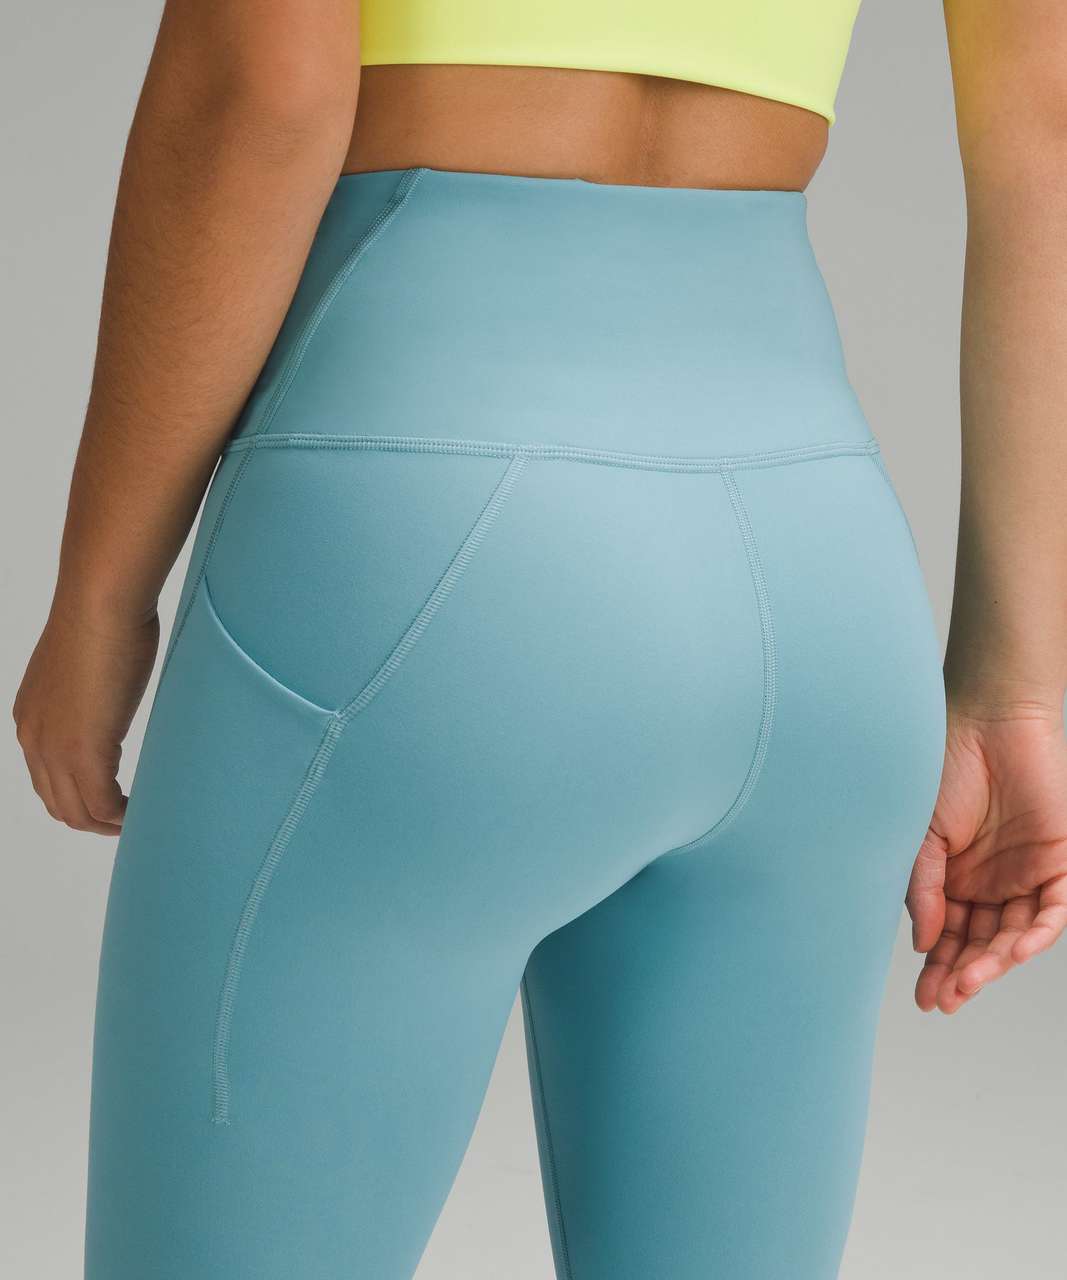 Lululemon athletica Wunder Train High-Rise Tight with Pockets 28, Women's  Leggings/Tights